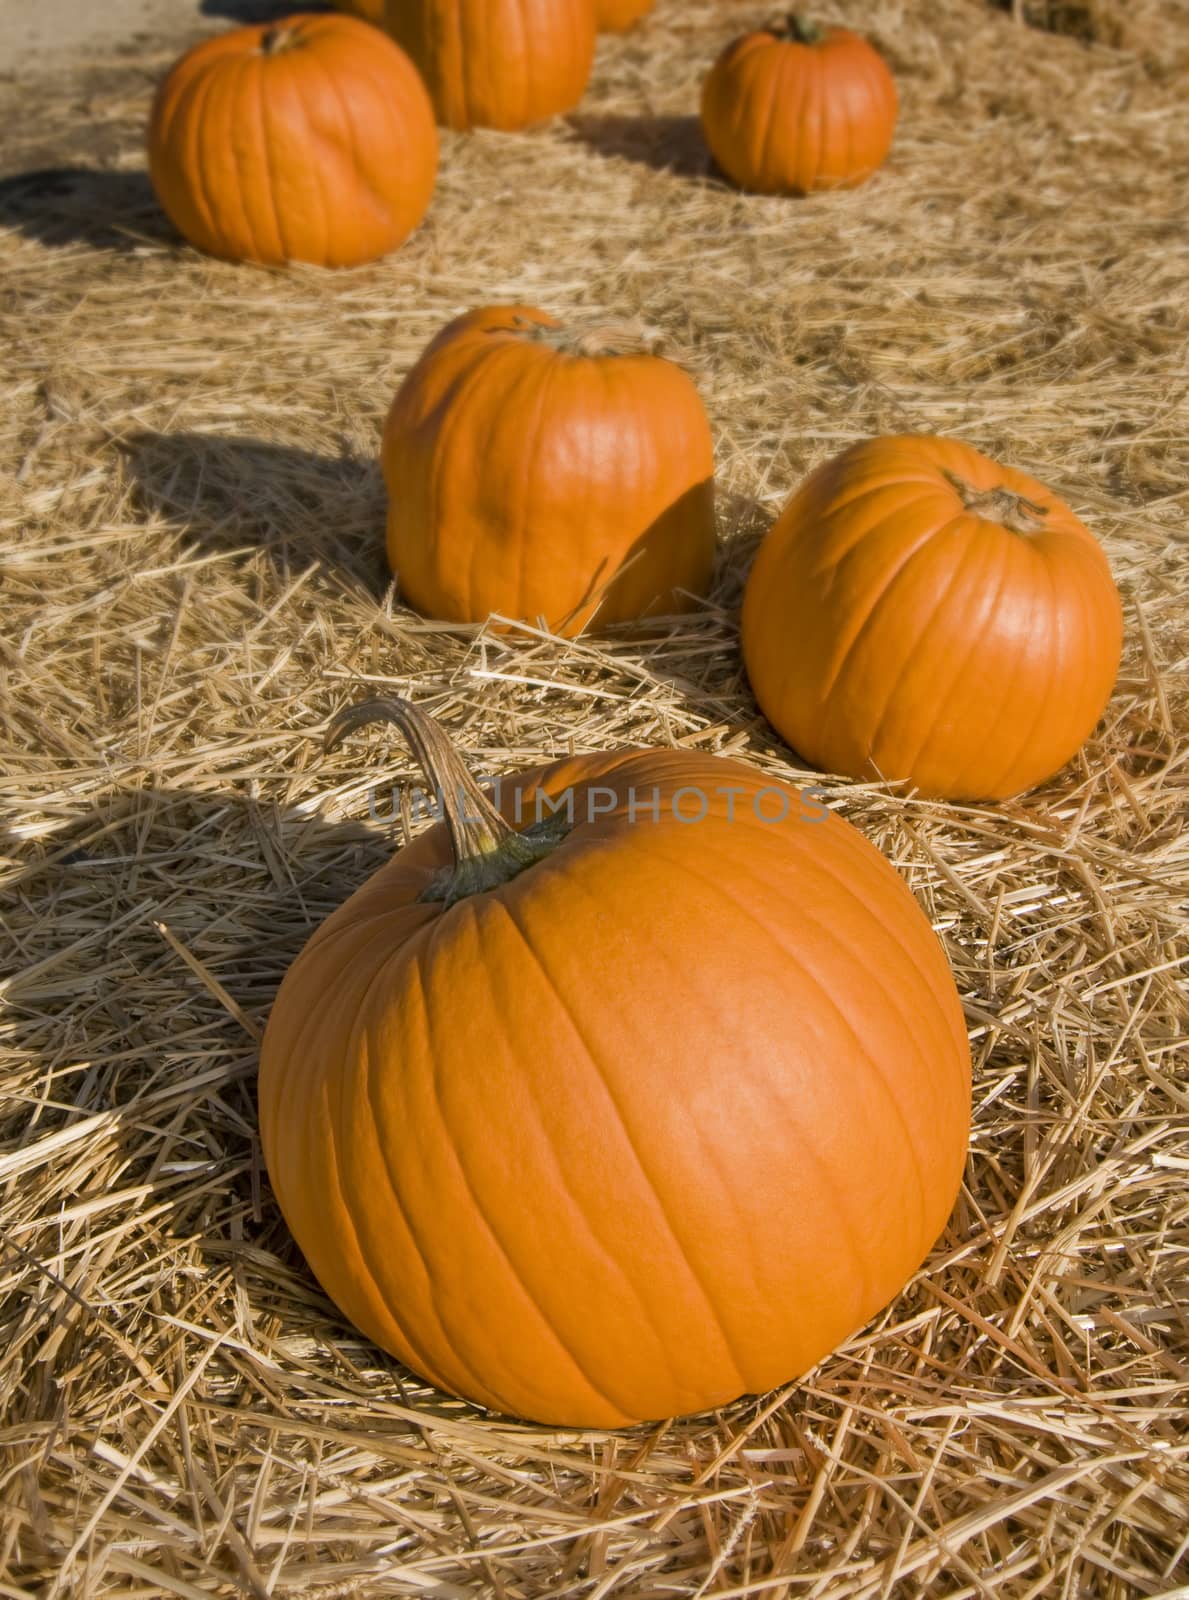 Large pumpkin from Fall harvestRejected: lighting